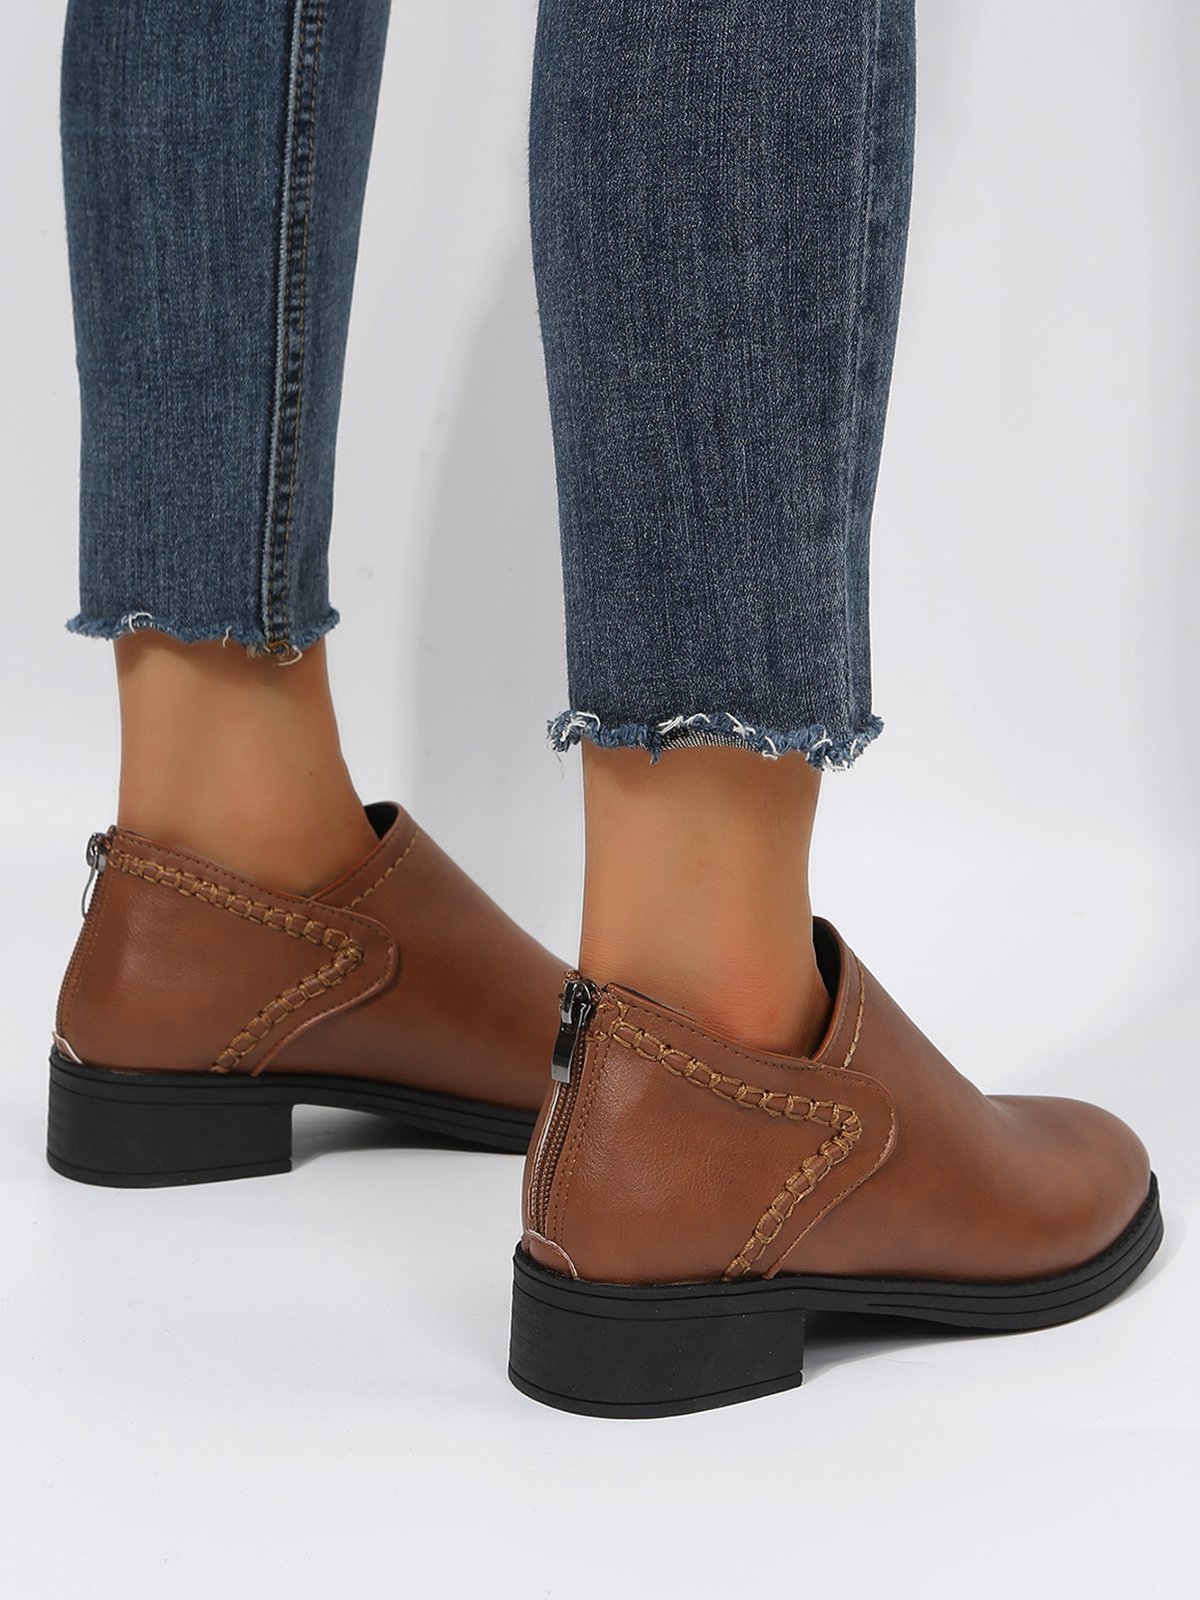 Low Heel Ankle Boots With Simple Stitching Design